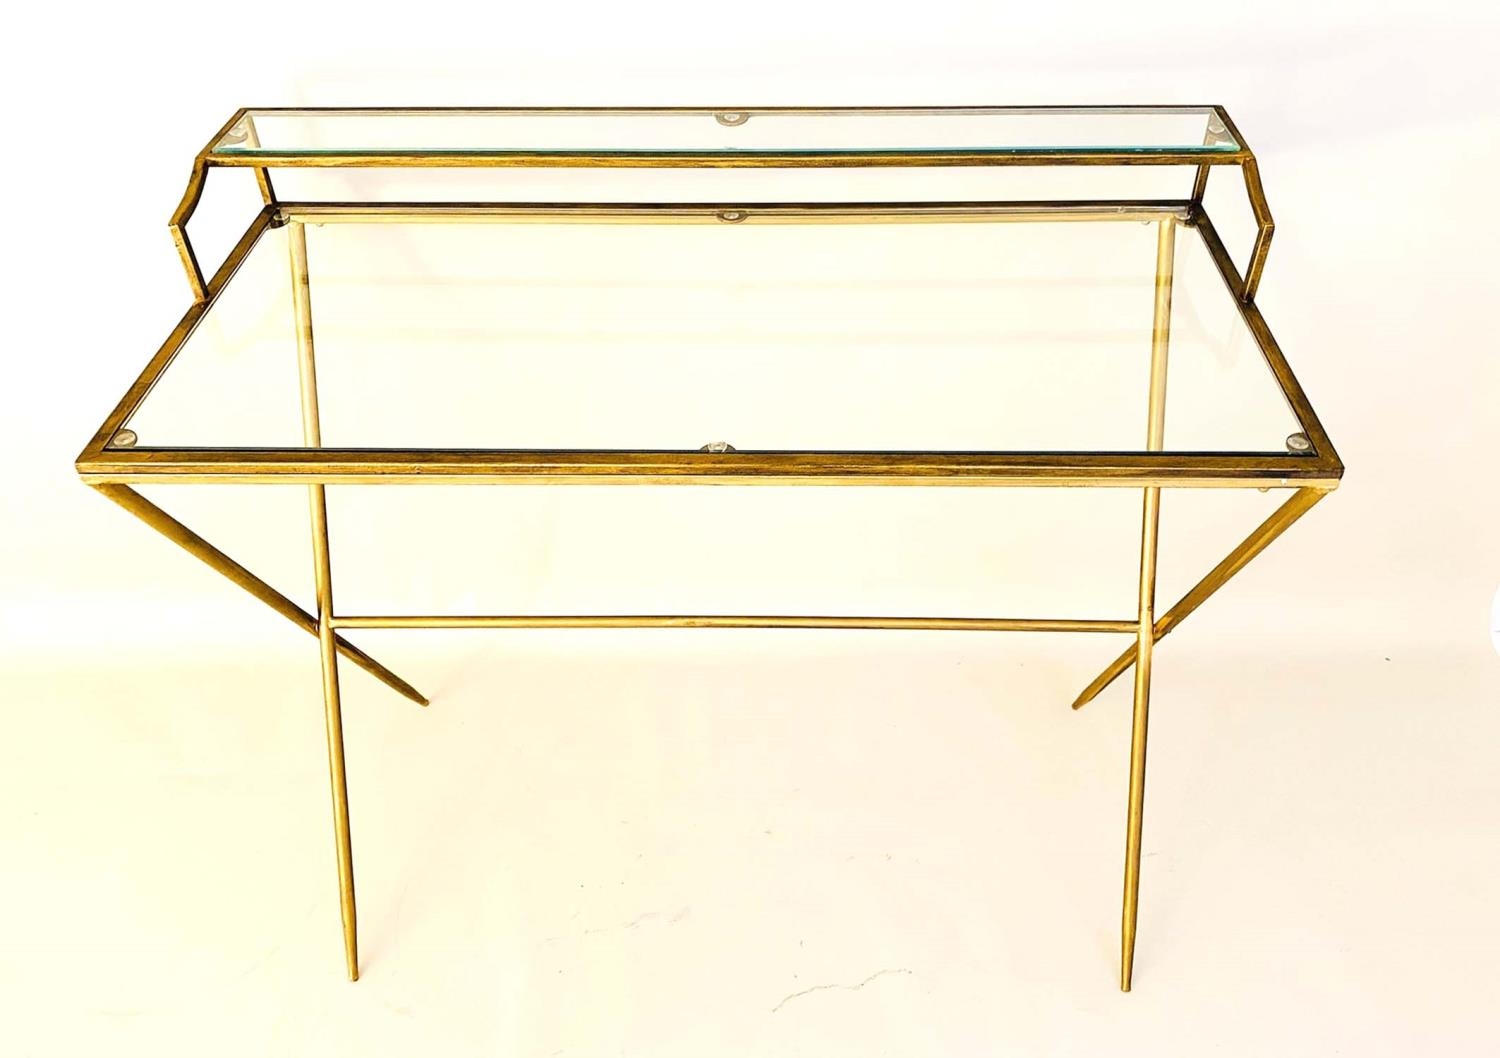 WRITING DESK, 1960s French style, gilt metal and glass, 87cm x 95cm x 42cm. - Image 2 of 3